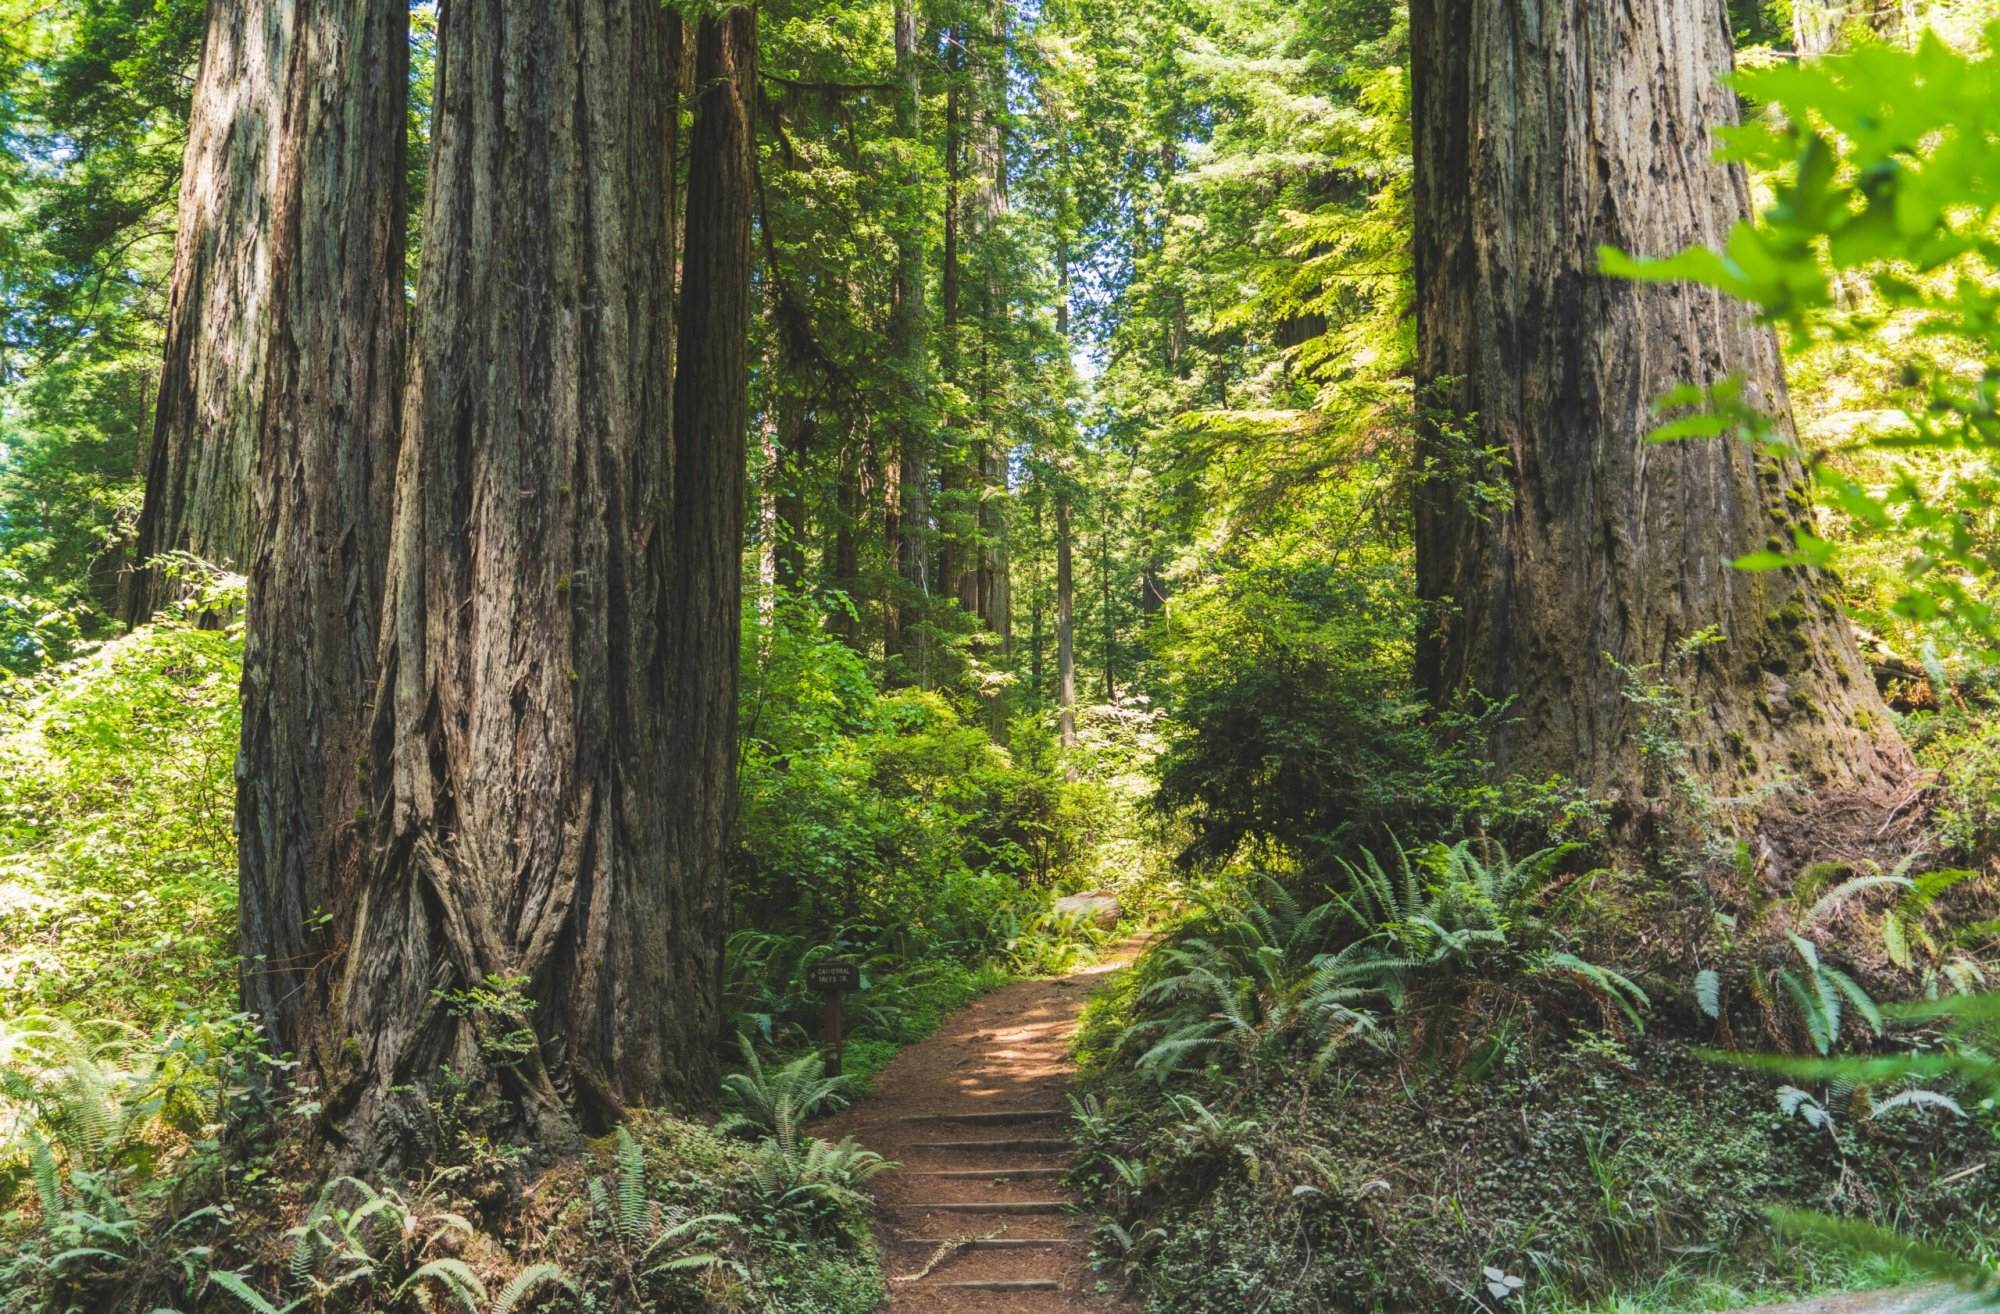 A path leading through a forest full of redwood trees.